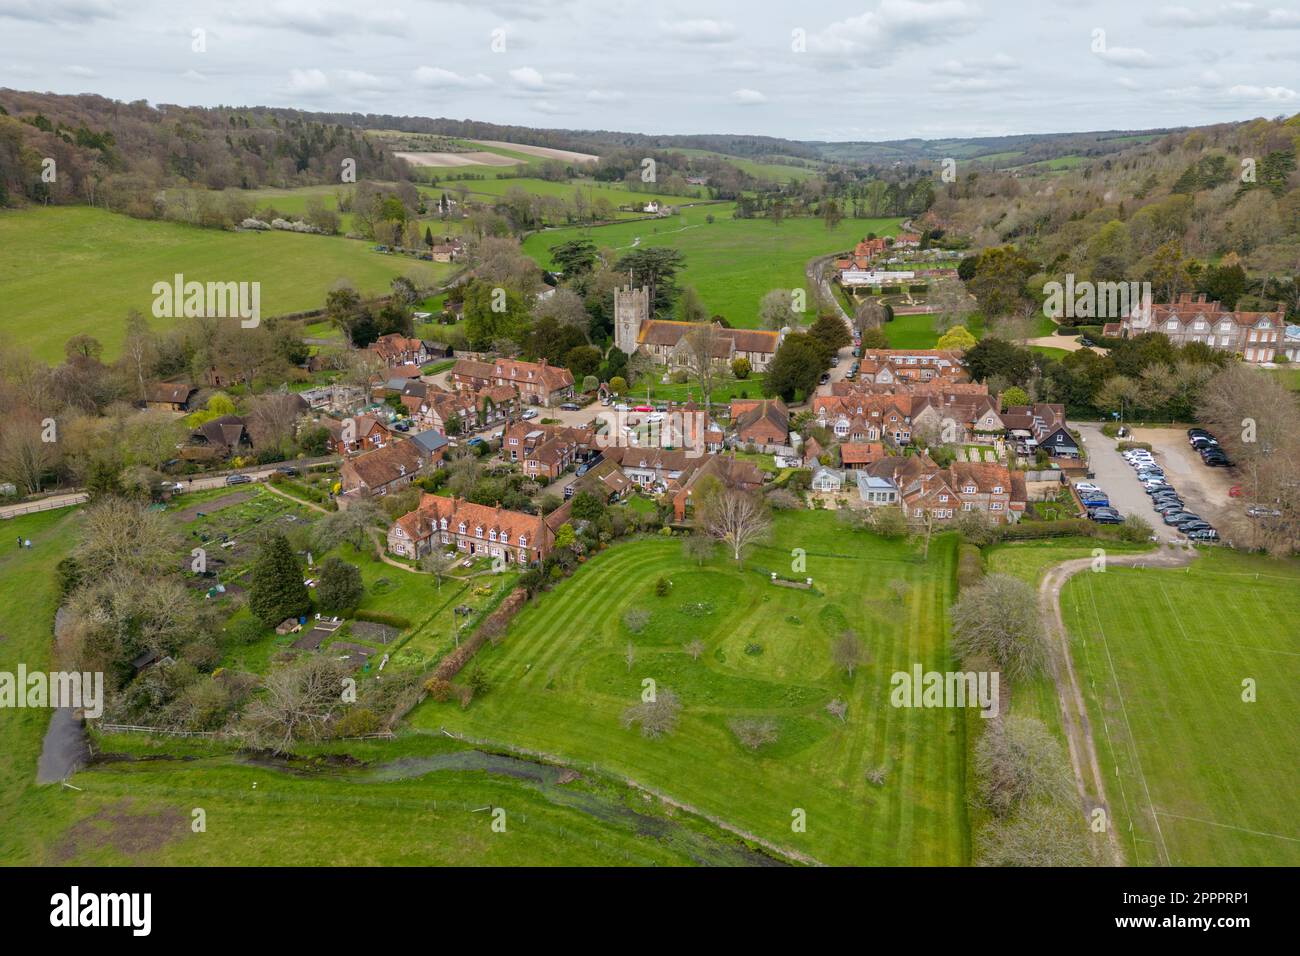 Aerial view of the village of Hambleden, Oxfordshire, UK. Stock Photo